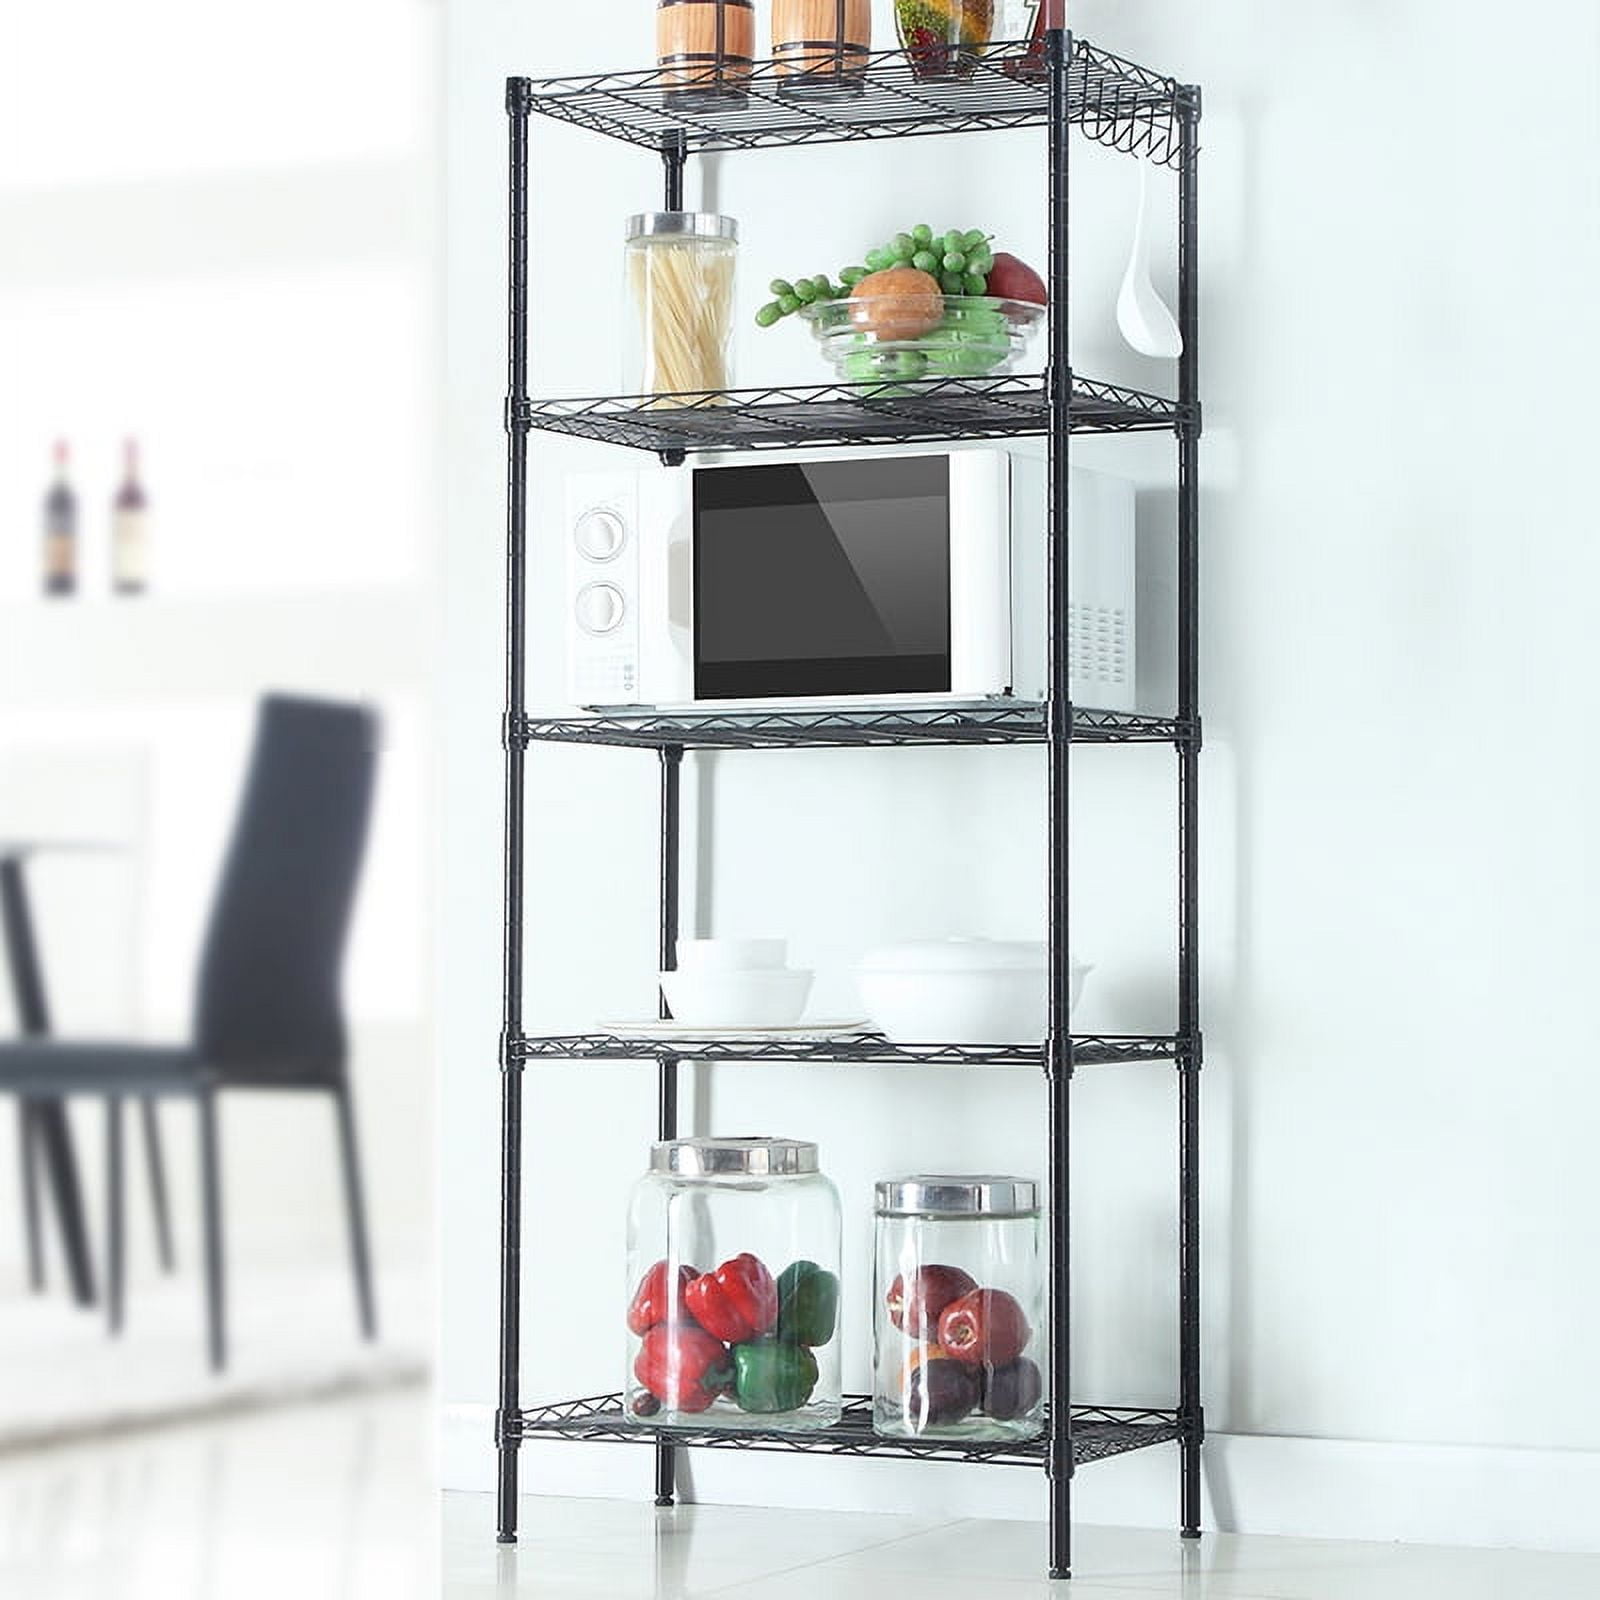 36” Long x 8” Wide Art Storage Rack- Two Height Options available